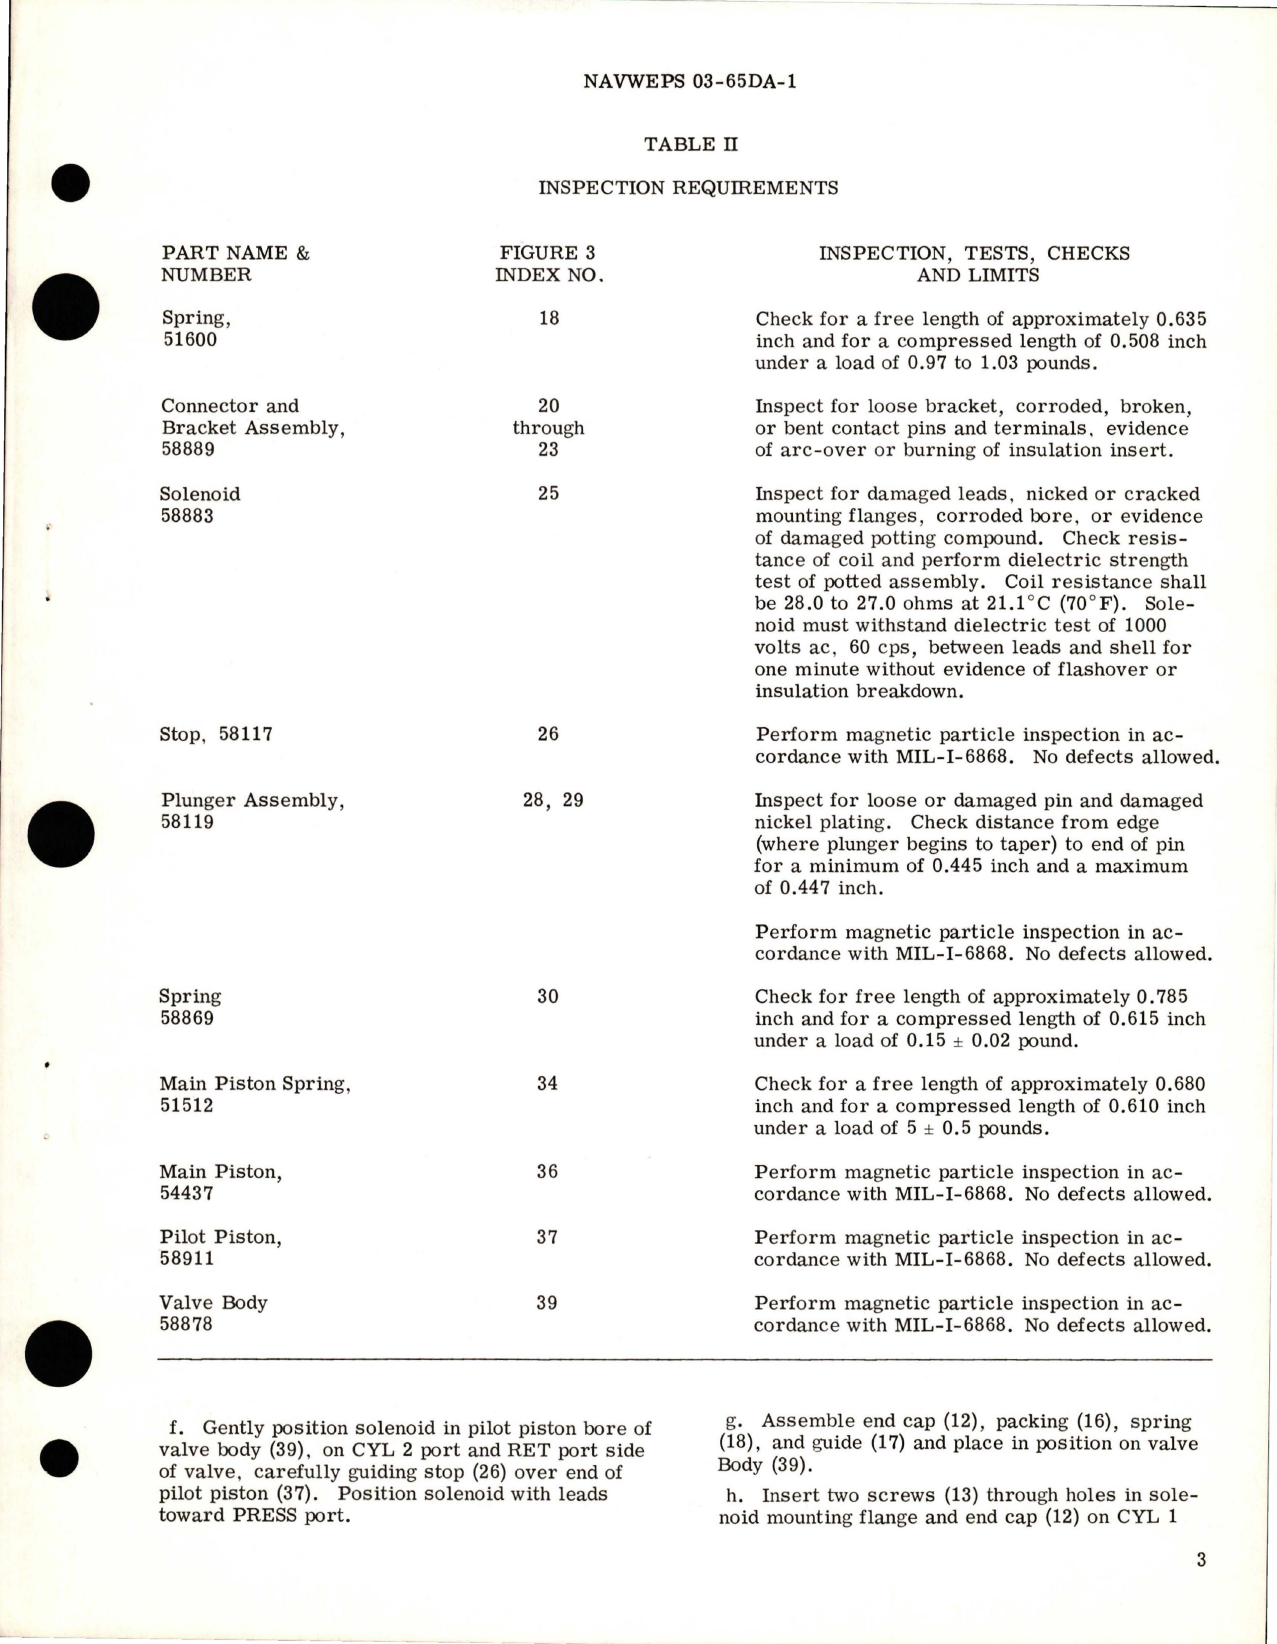 Sample page 5 from AirCorps Library document: Overhaul Instructions with Illustrated Parts for Directional Control Valve Assembly - 70944-2